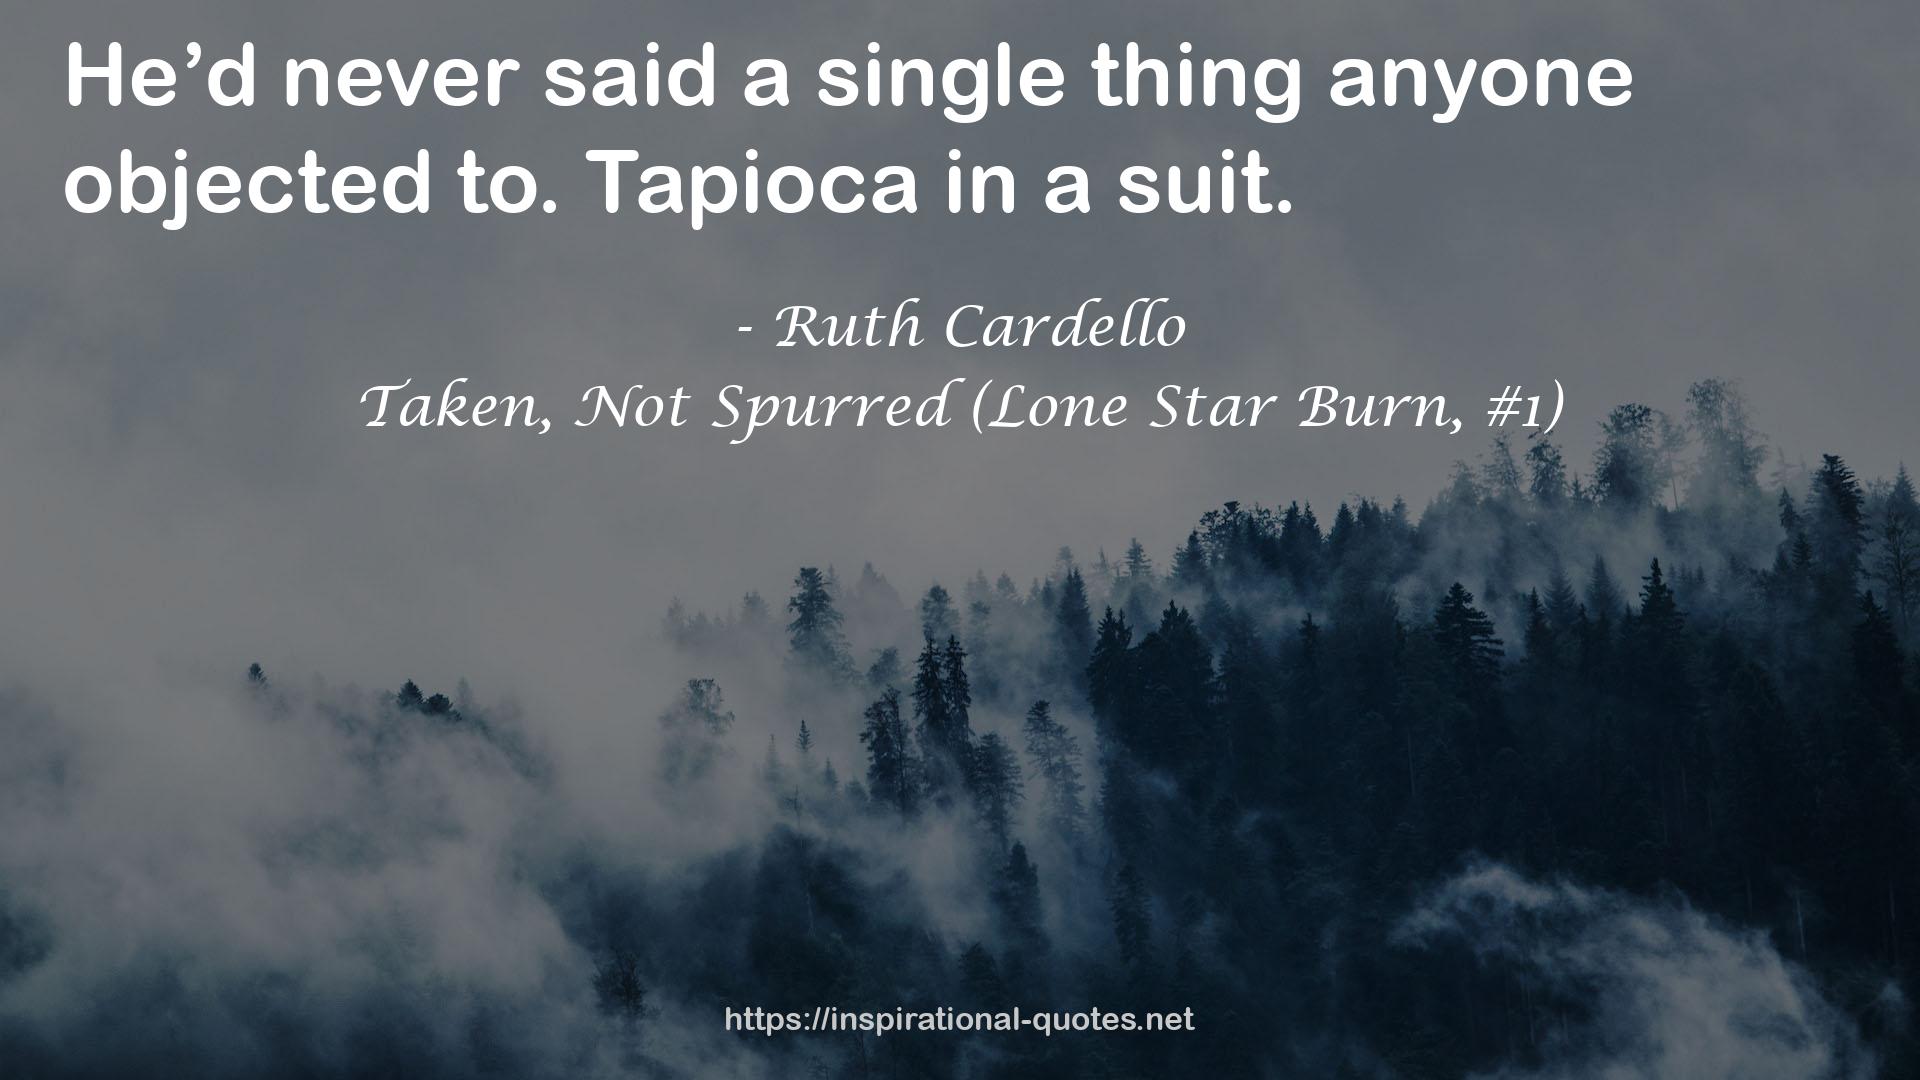 Taken, Not Spurred (Lone Star Burn, #1) QUOTES